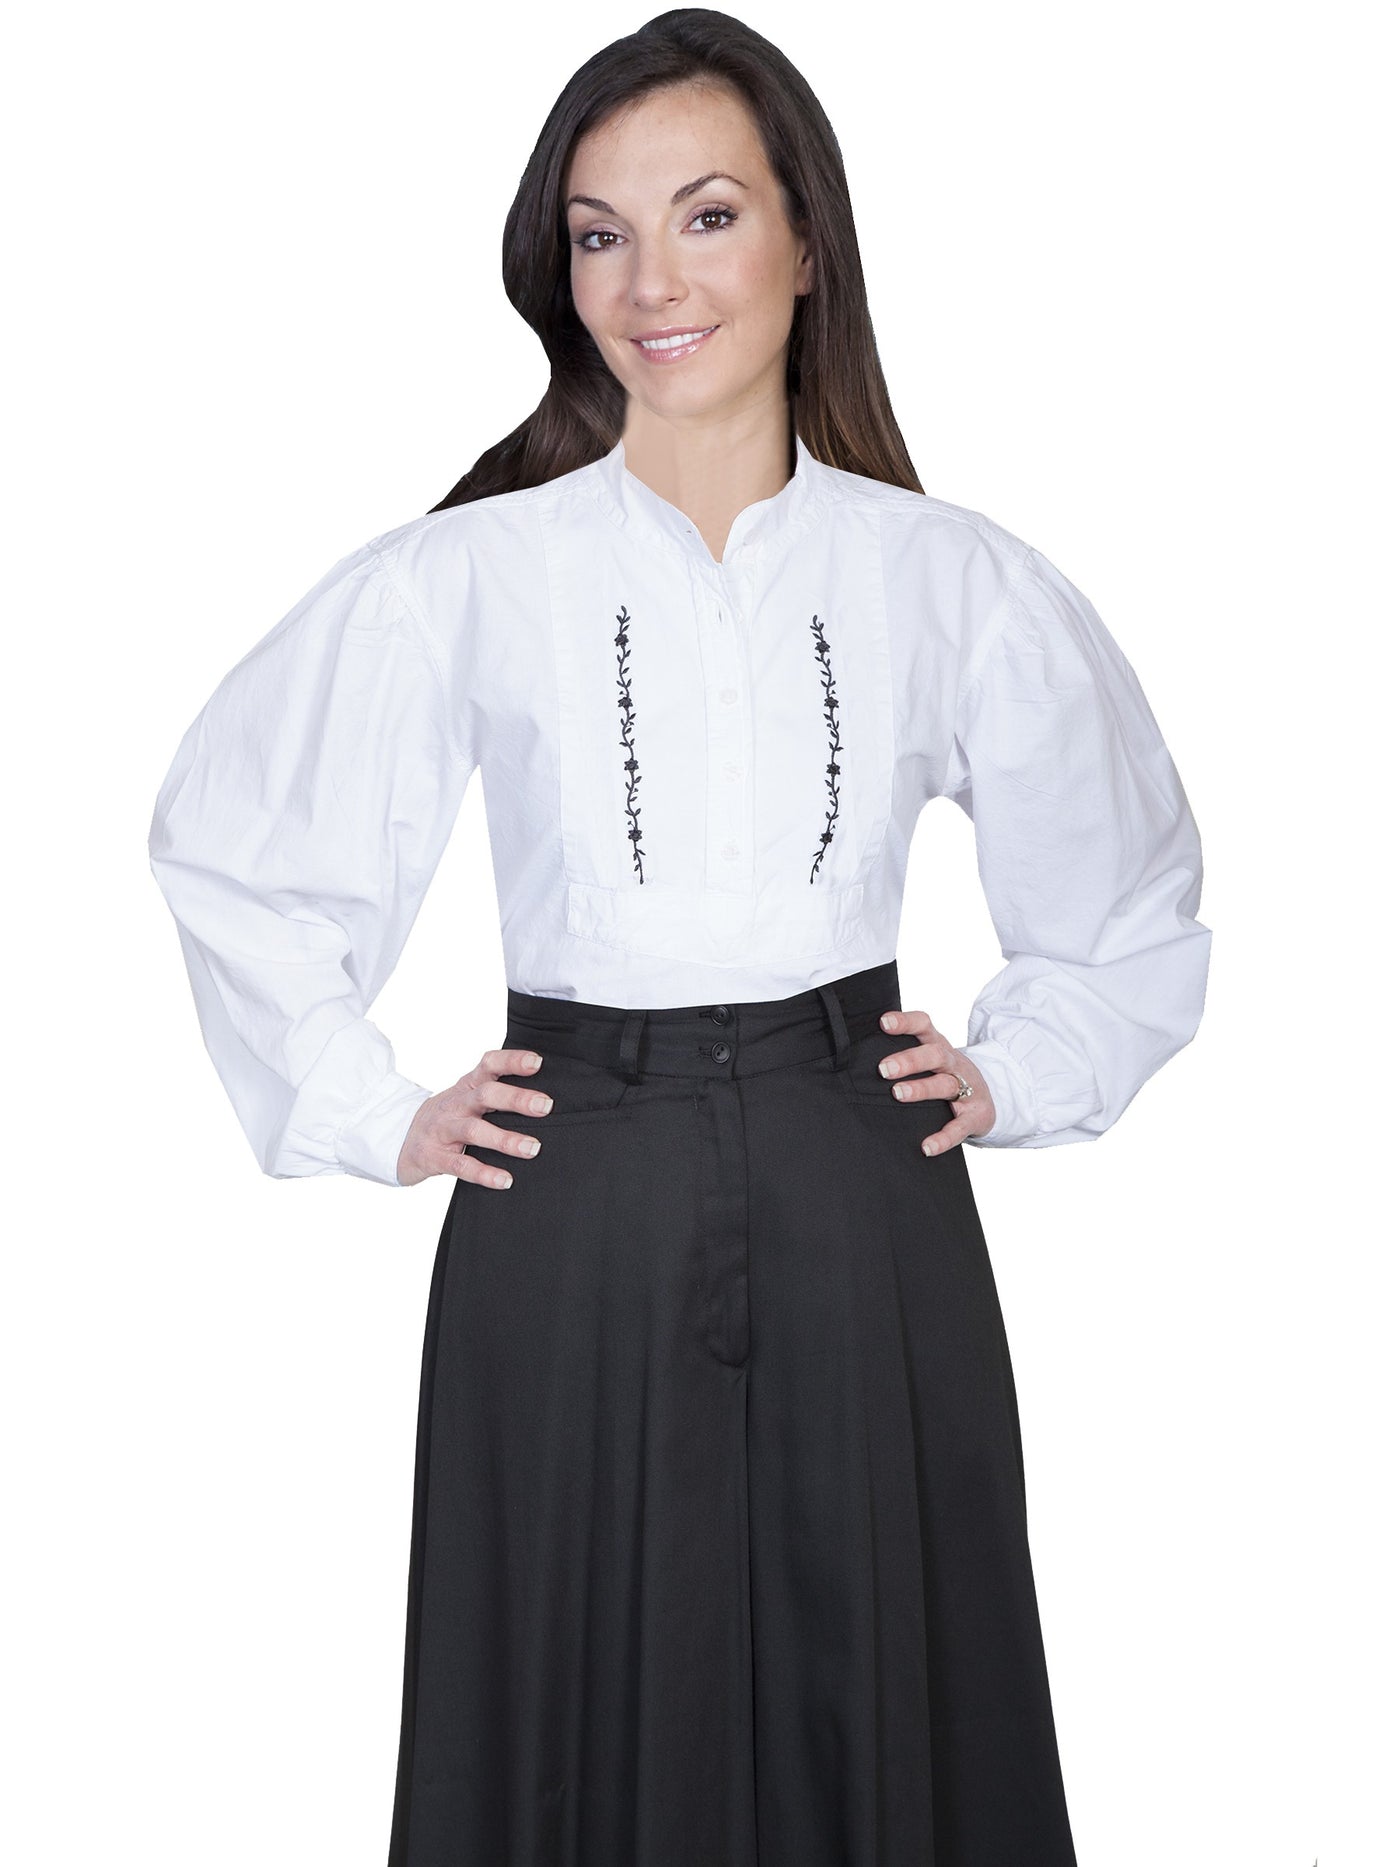 Victorian Style Embroidered Shirt in White - SOLD OUT